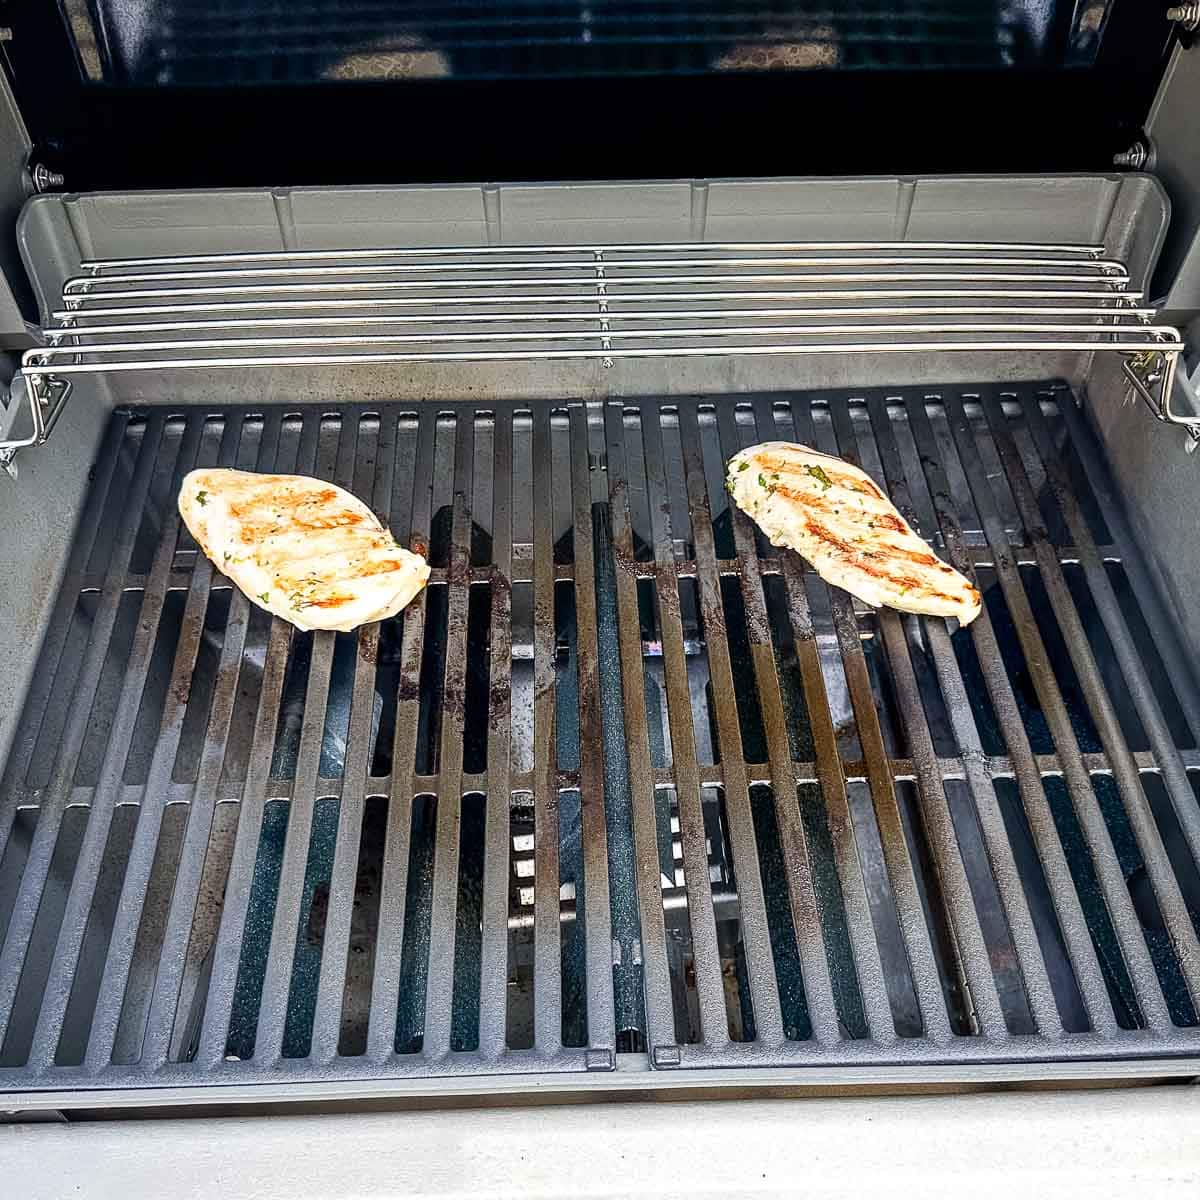 Chicken grilling on a gas grill.